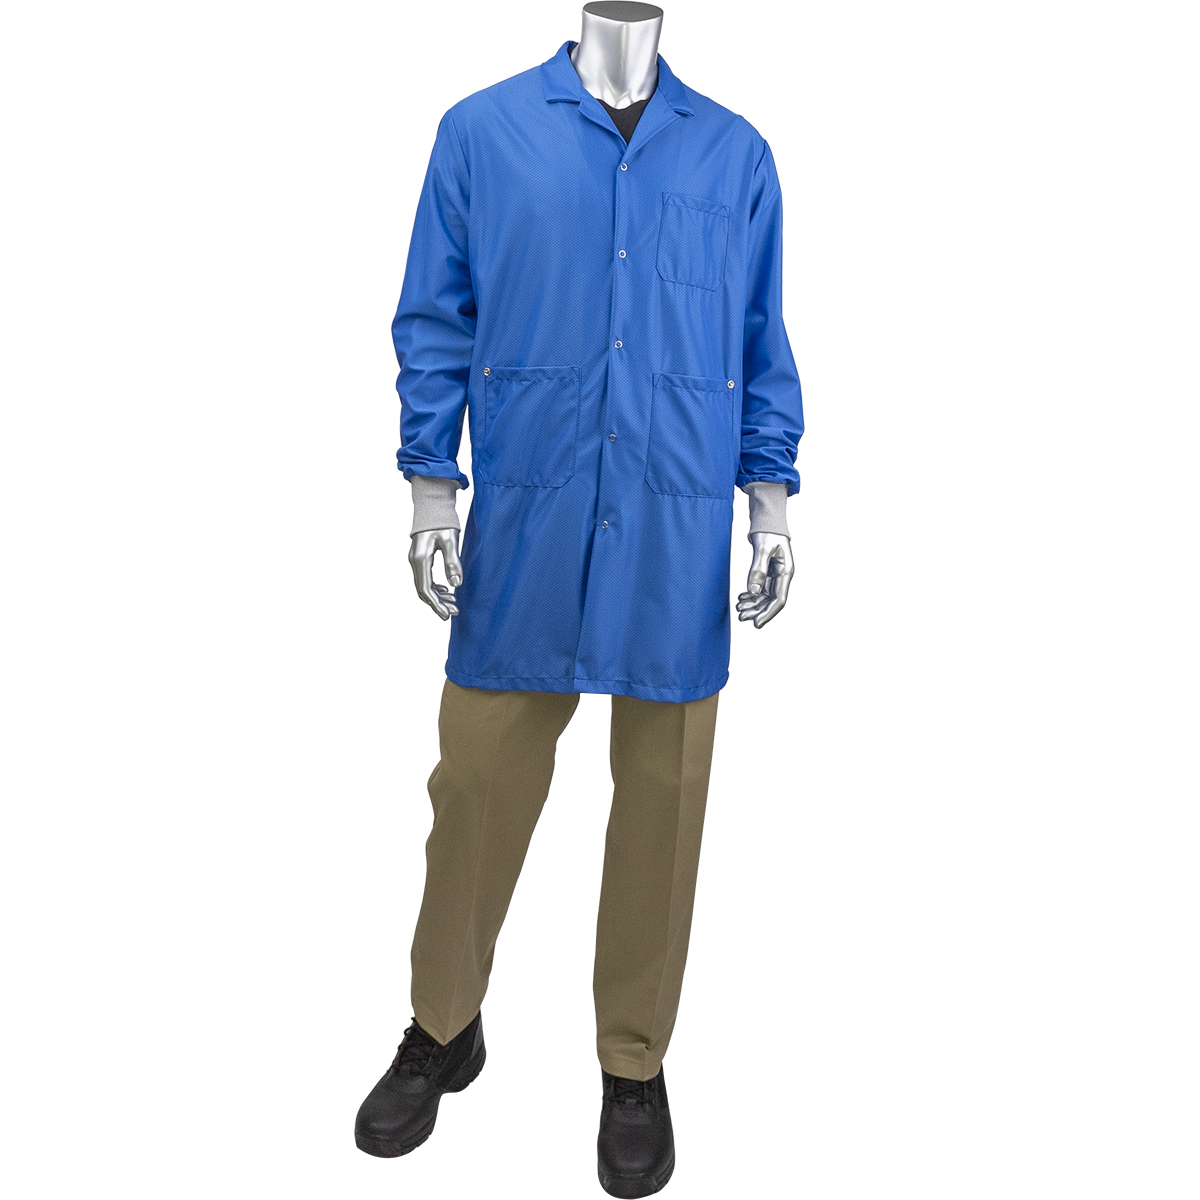 BR51C-44RB PIP® Uniform Technology™ StatStar Long ESD Labcoats with ESD Knit Cuffs, Blue